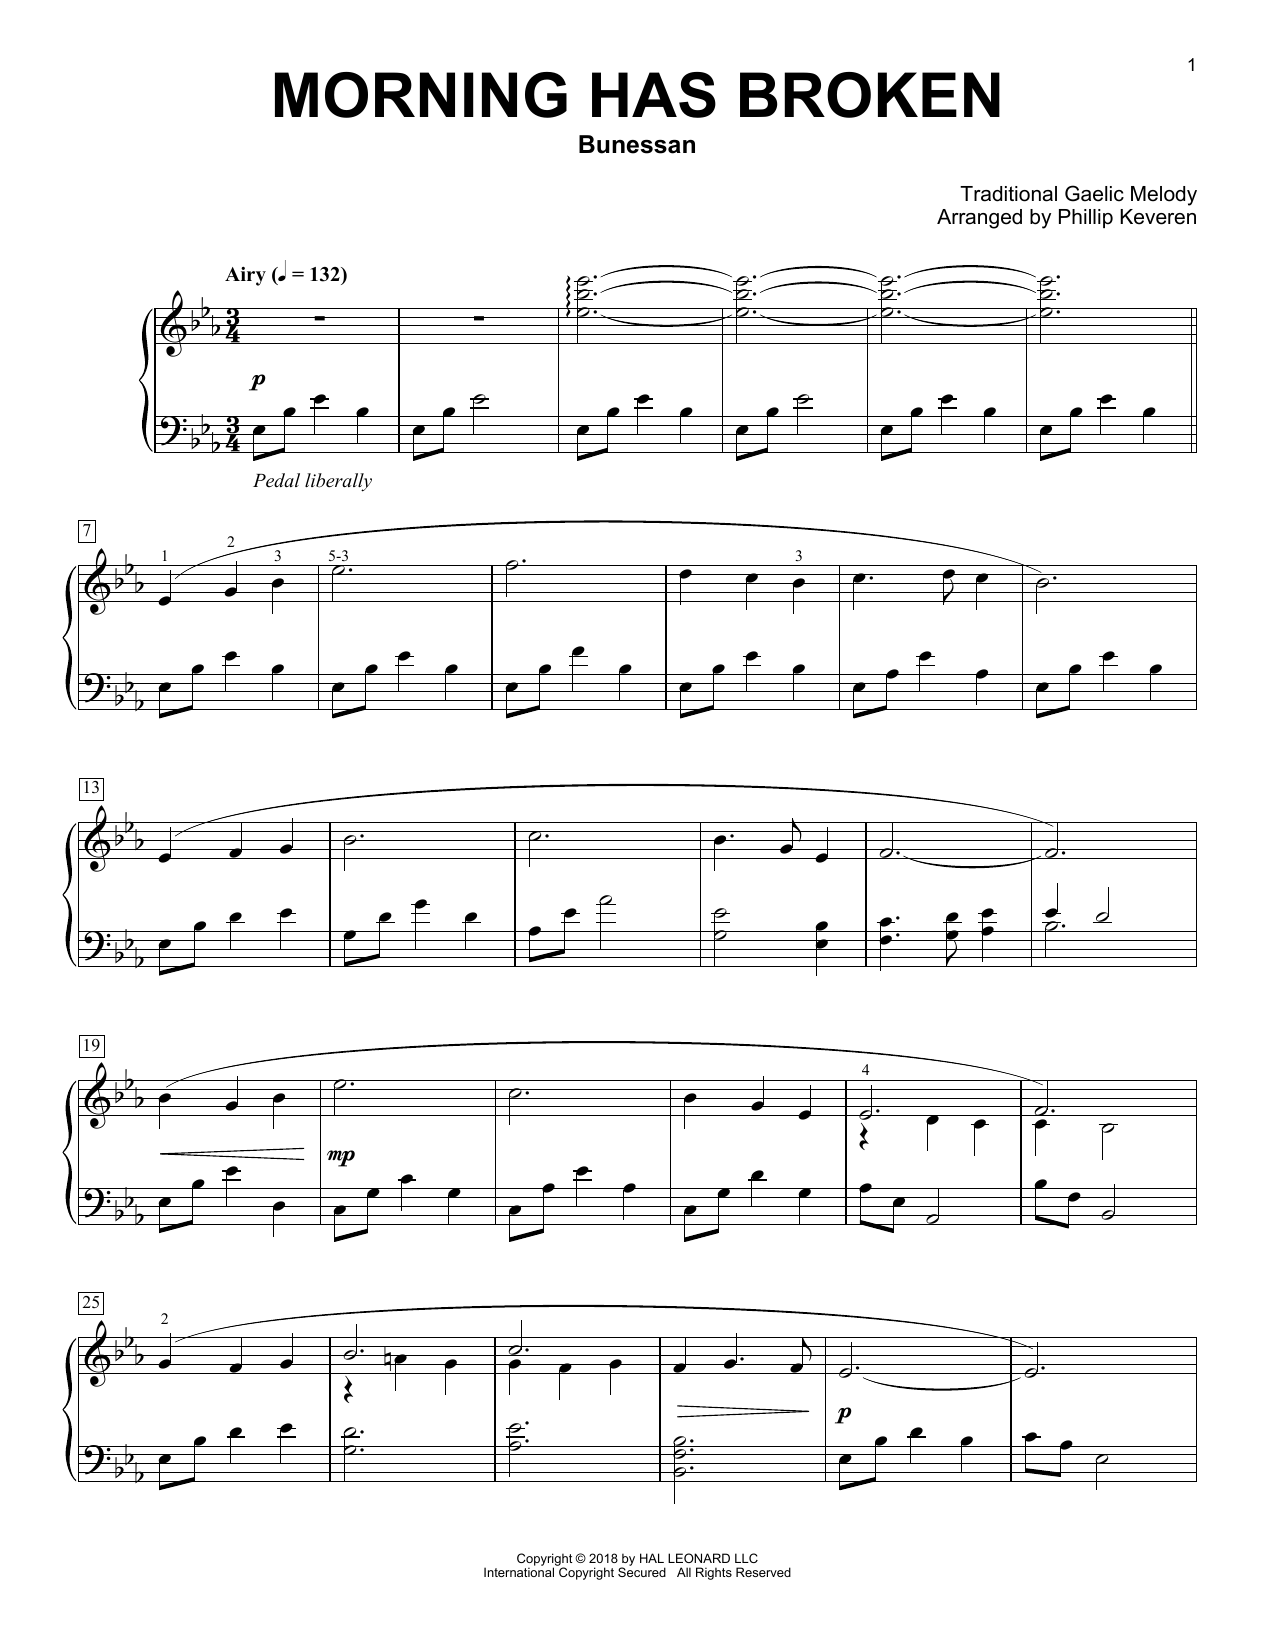 Download Traditional Gaelic Melody Morning Has Broken (arr. Phillip Kevere Sheet Music